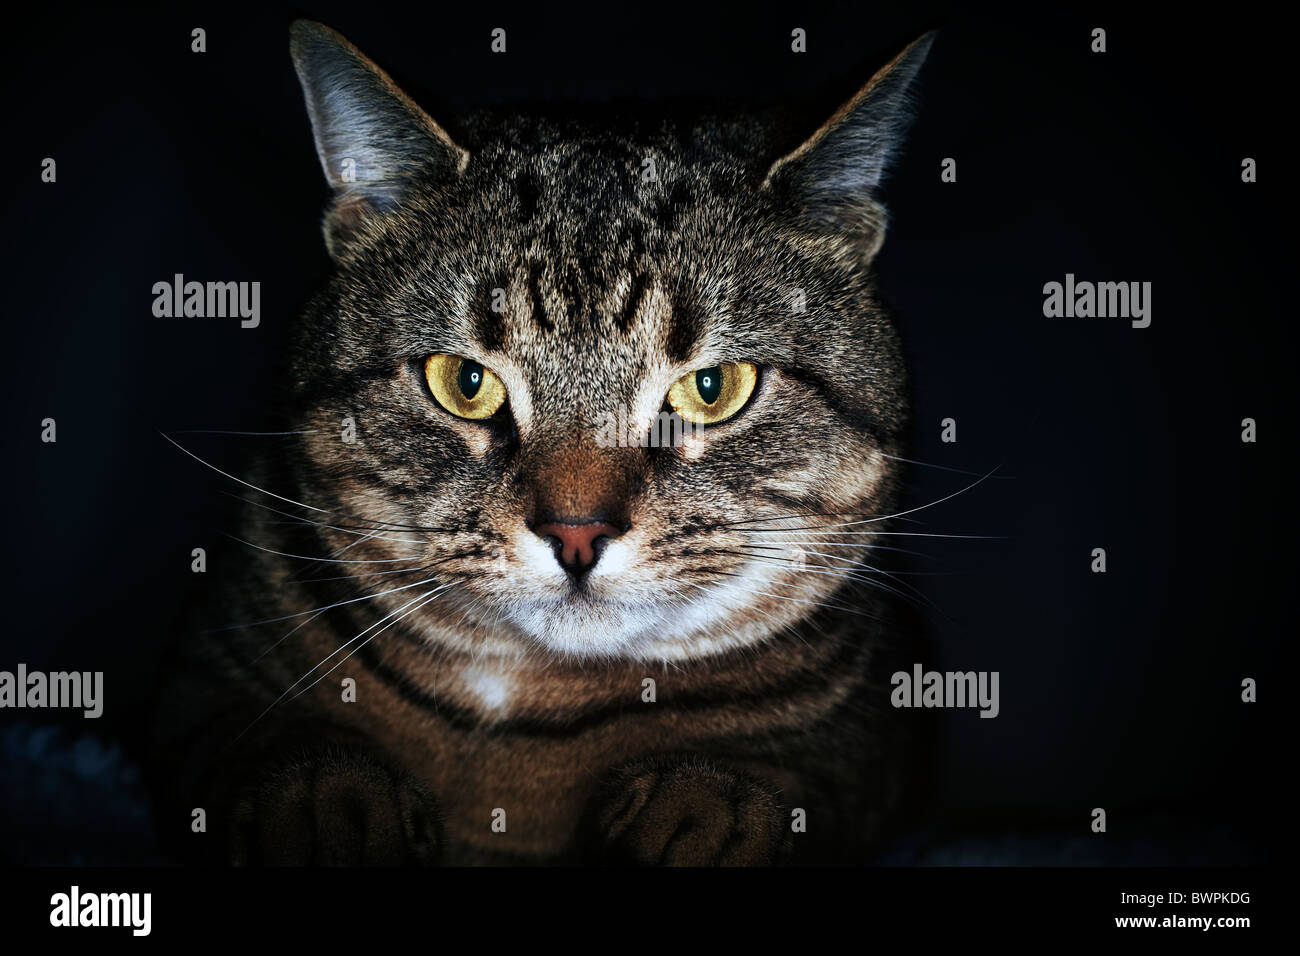 A close up of a tabby cat shot in a studio Stock Photo